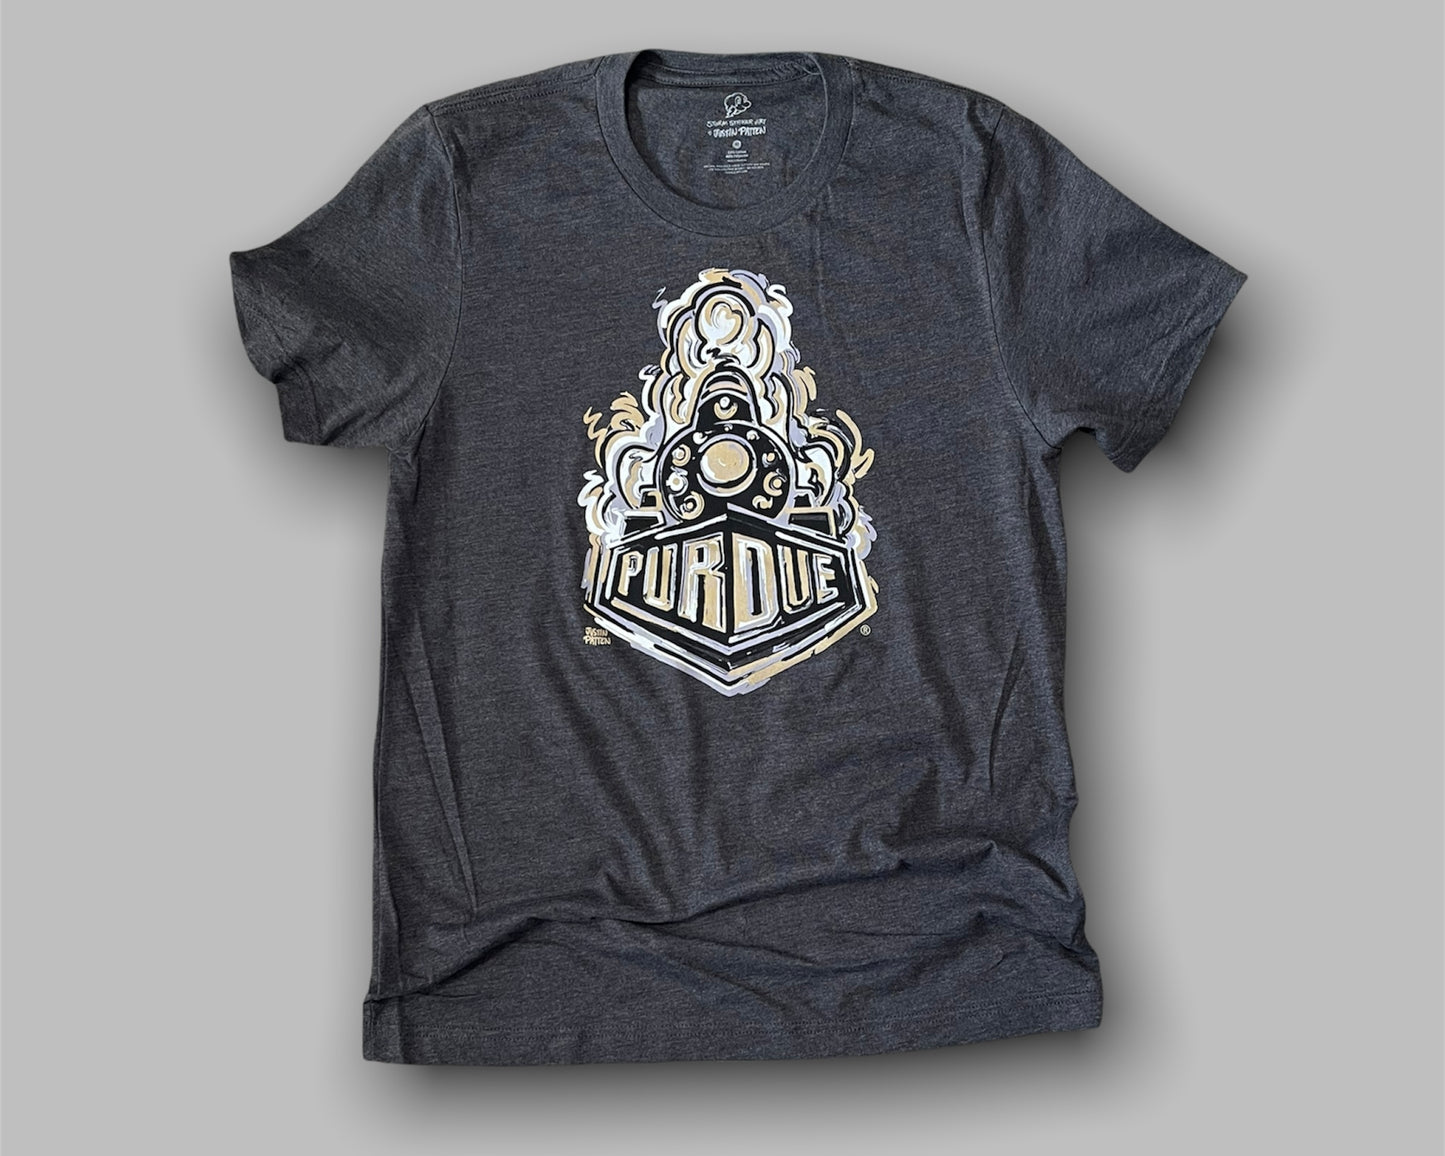 Purdue Boilermaker Special Unisex Short Sleeve Tee by Justin Patten (2 Colors)